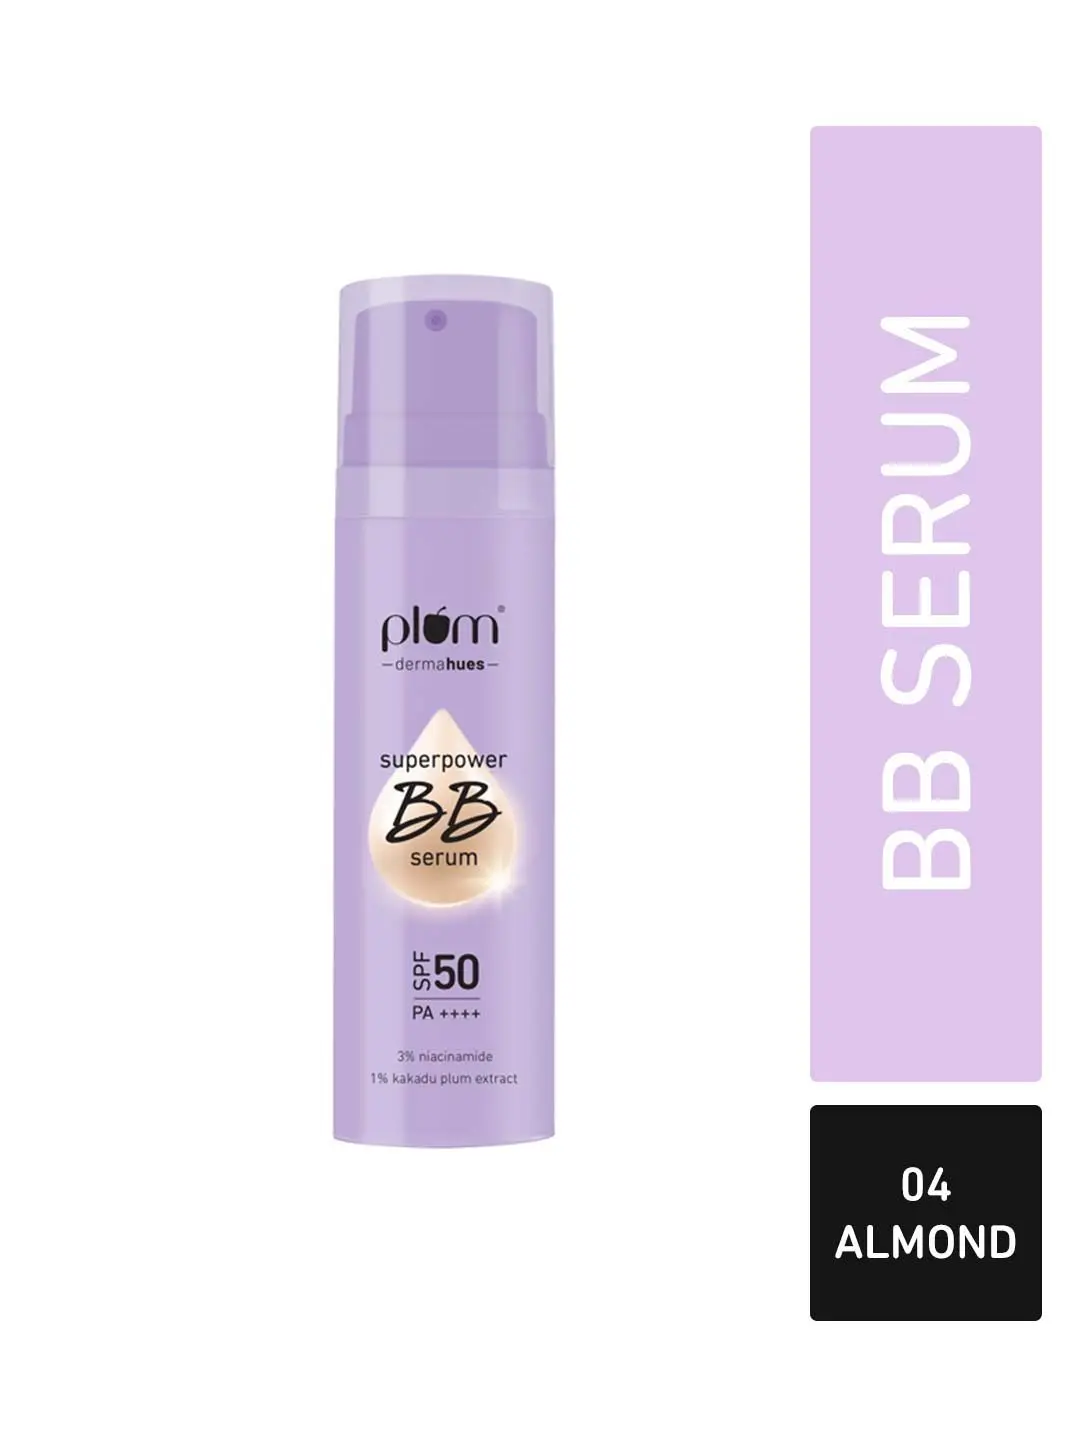 Plum Superpower BB Serum with SPF 50 PA ++++ | Natural Everyday Base | Evens Out Skin Tone | Buildable Coverage | With 3% Niacinamide | 100% Vegan & Cruelty Free | 30 ml - 04 Almond